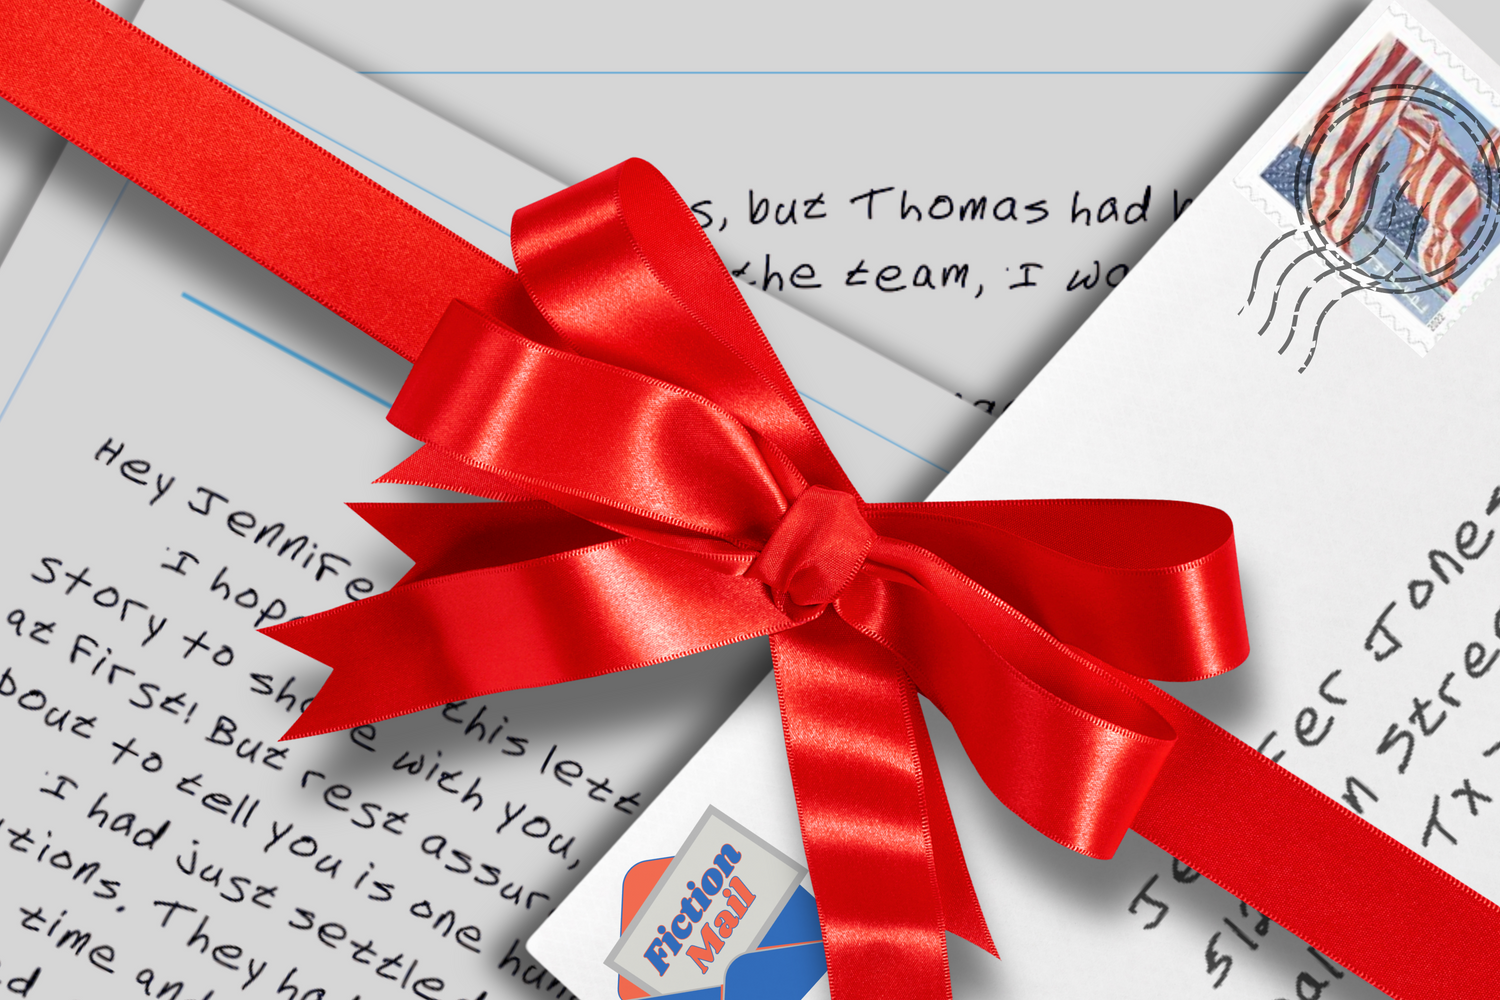 Fiction Mail is a unique gift idea for the reader in your life or for someone who misses the nostalgia of getting letters in the mail.